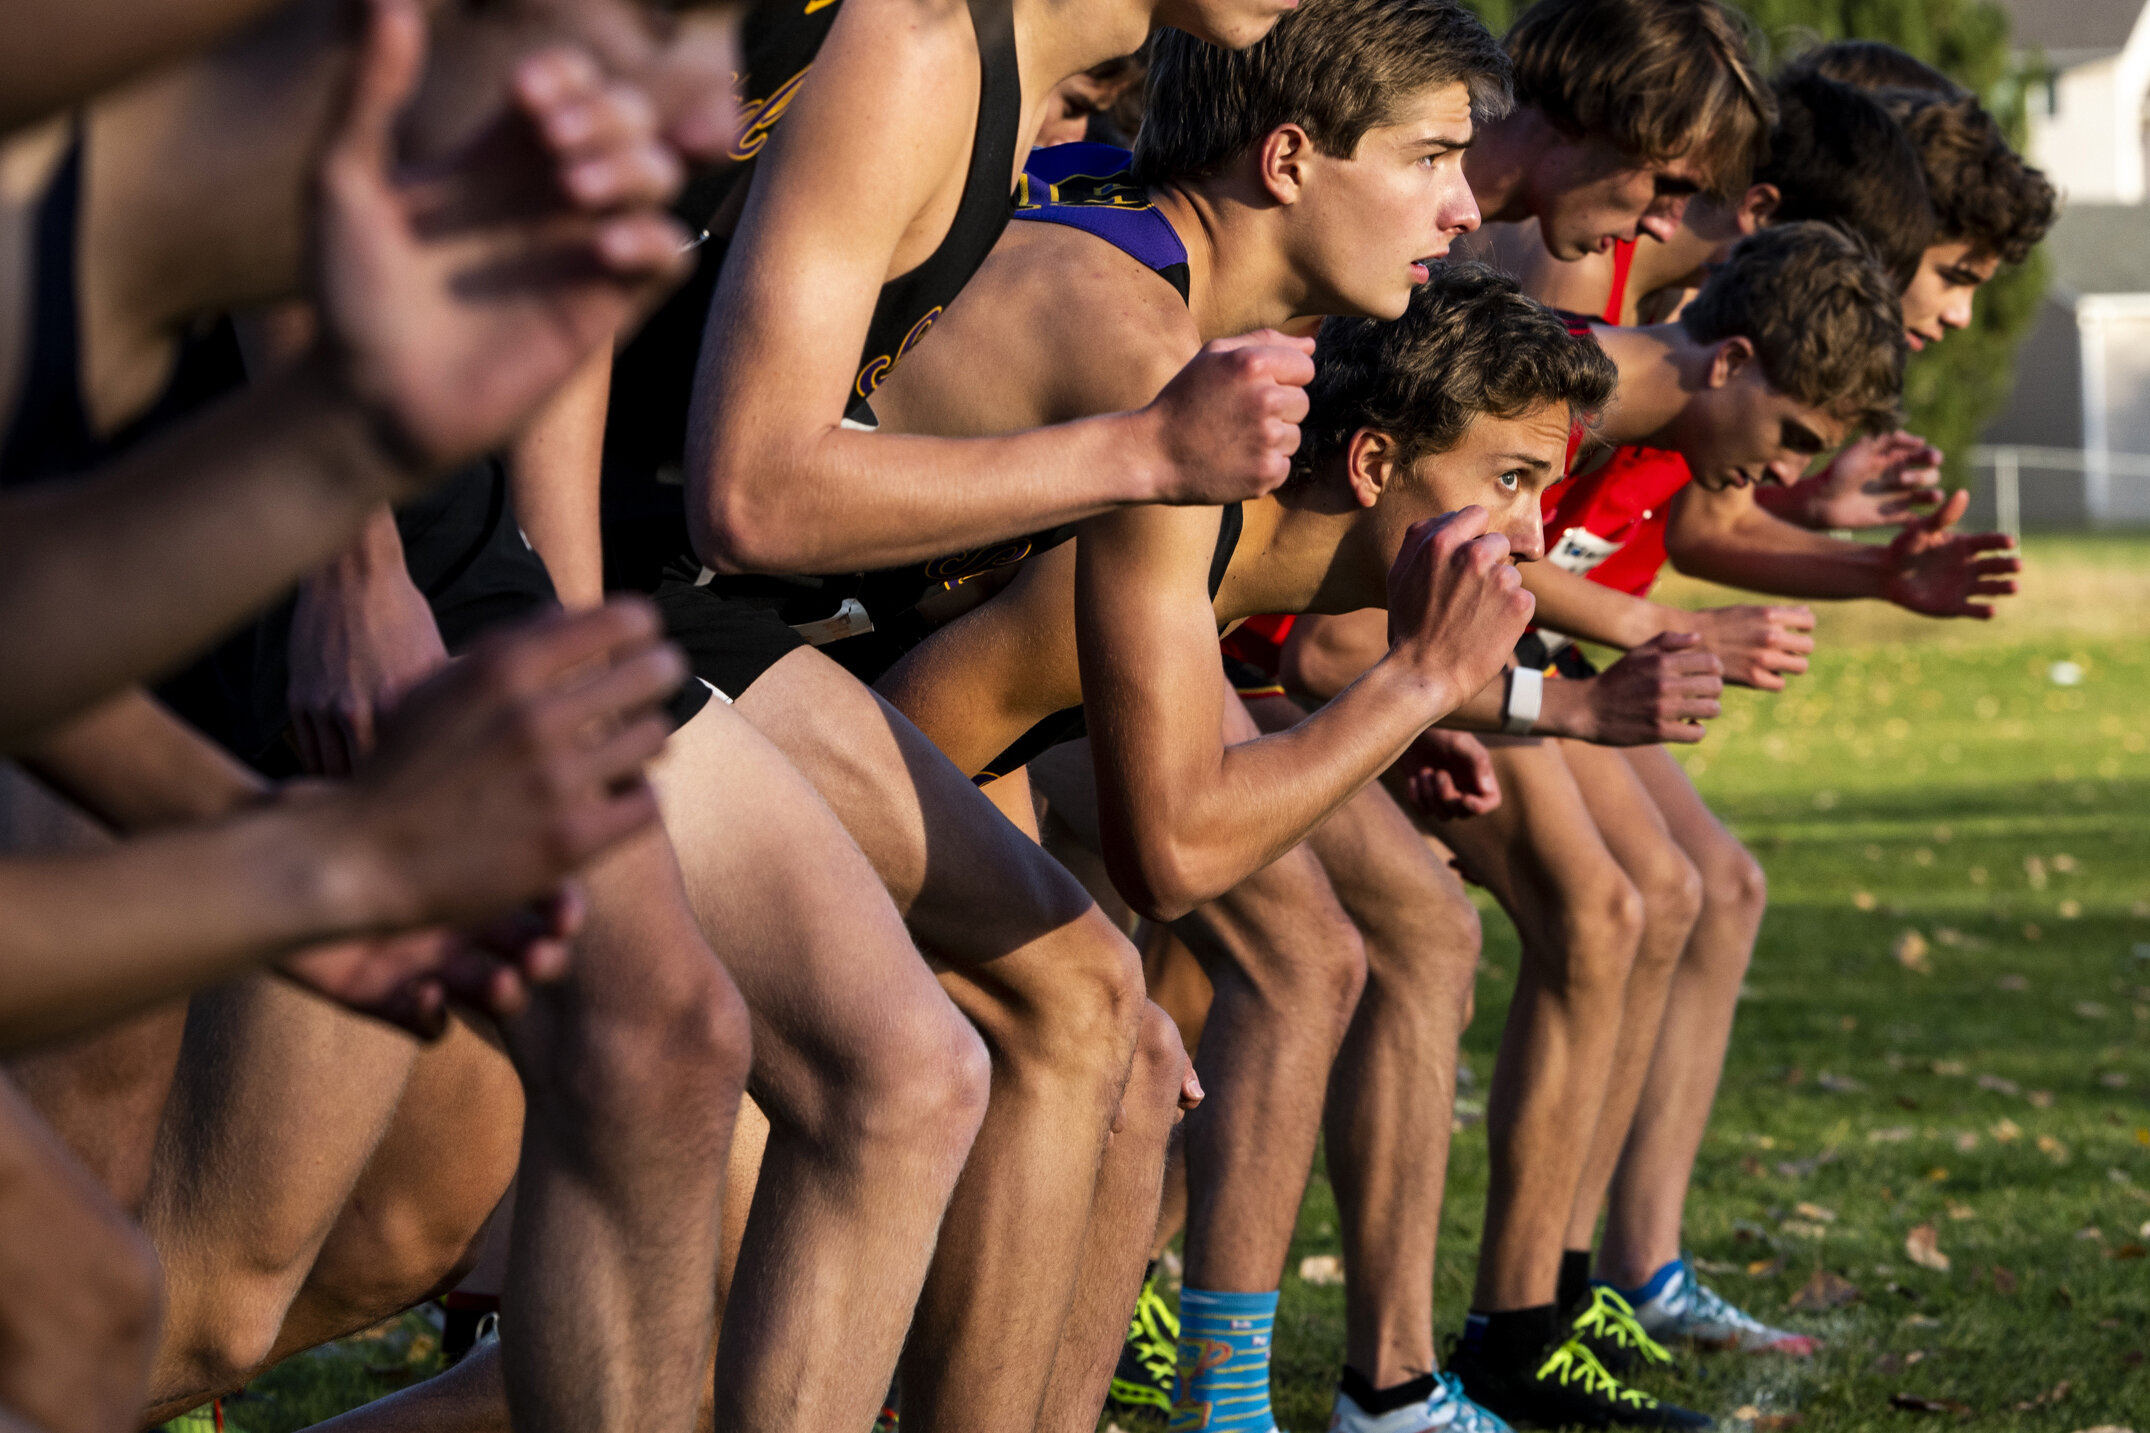  Runners take their marks at the start of the Runner’s Edge Cross Country meet at Linda Vista Golf Course in Missoula, Oct. 15, 2020.  